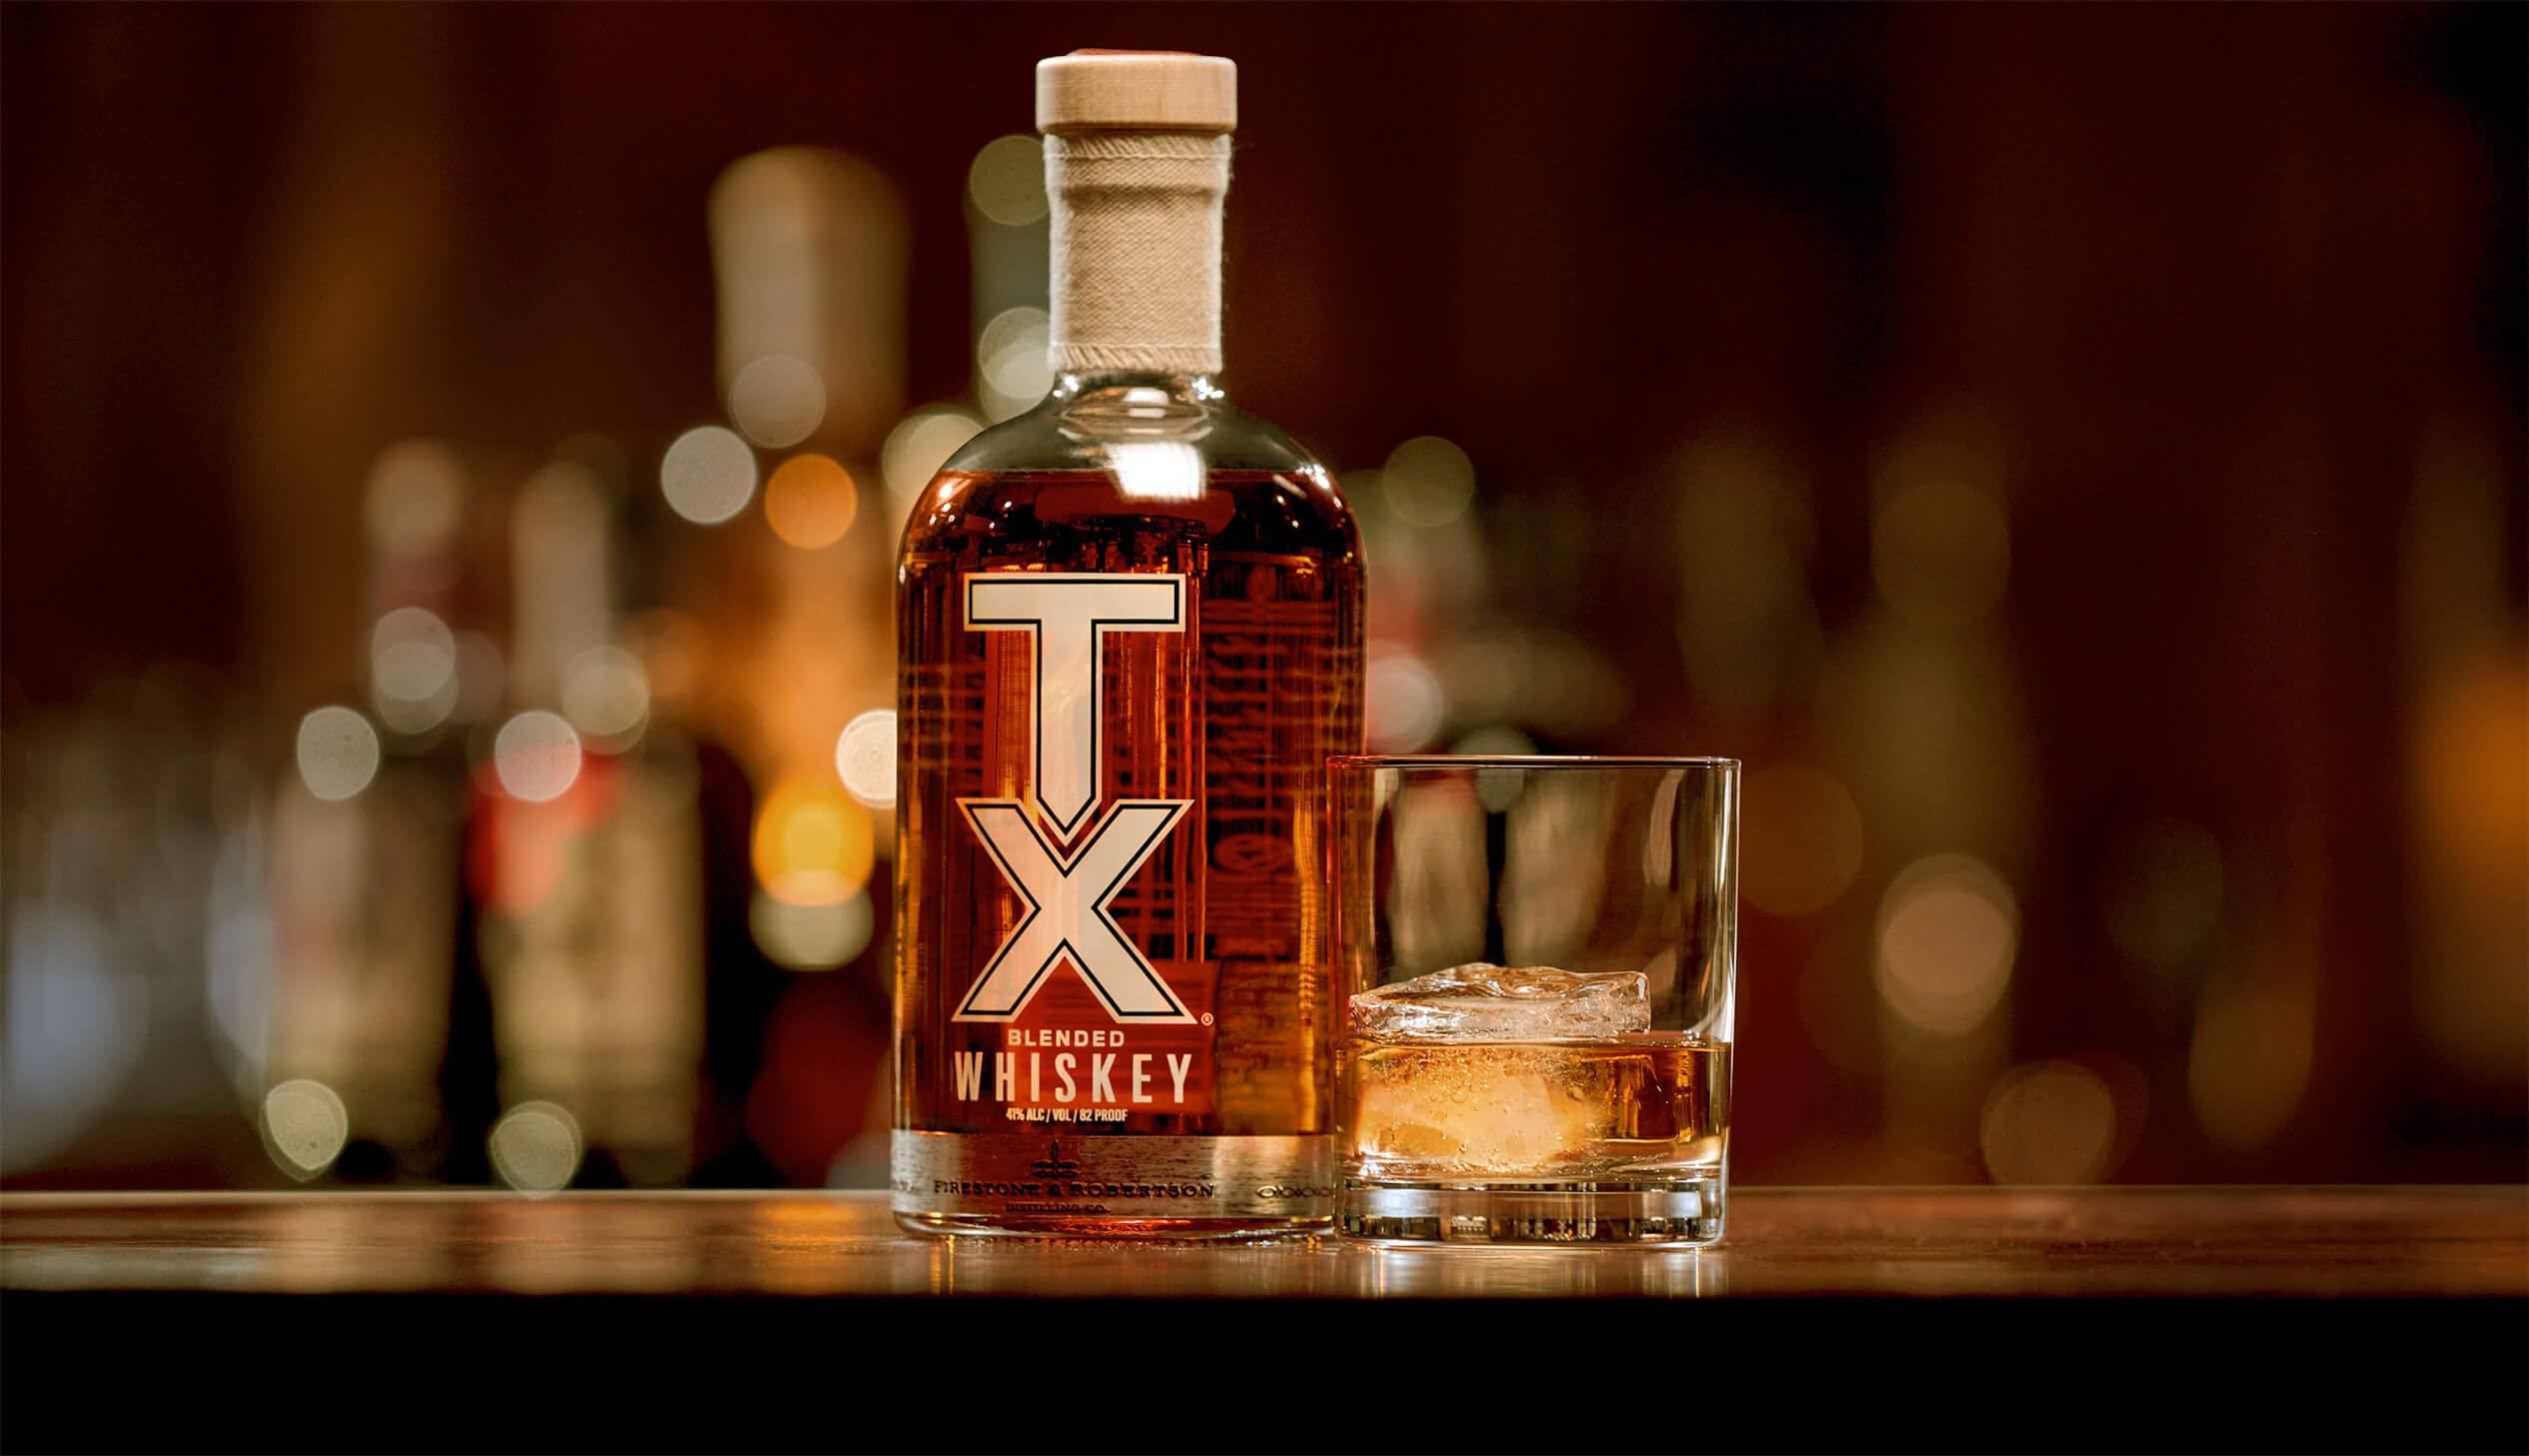 Bottle of TX Whiskey with a glass next to it